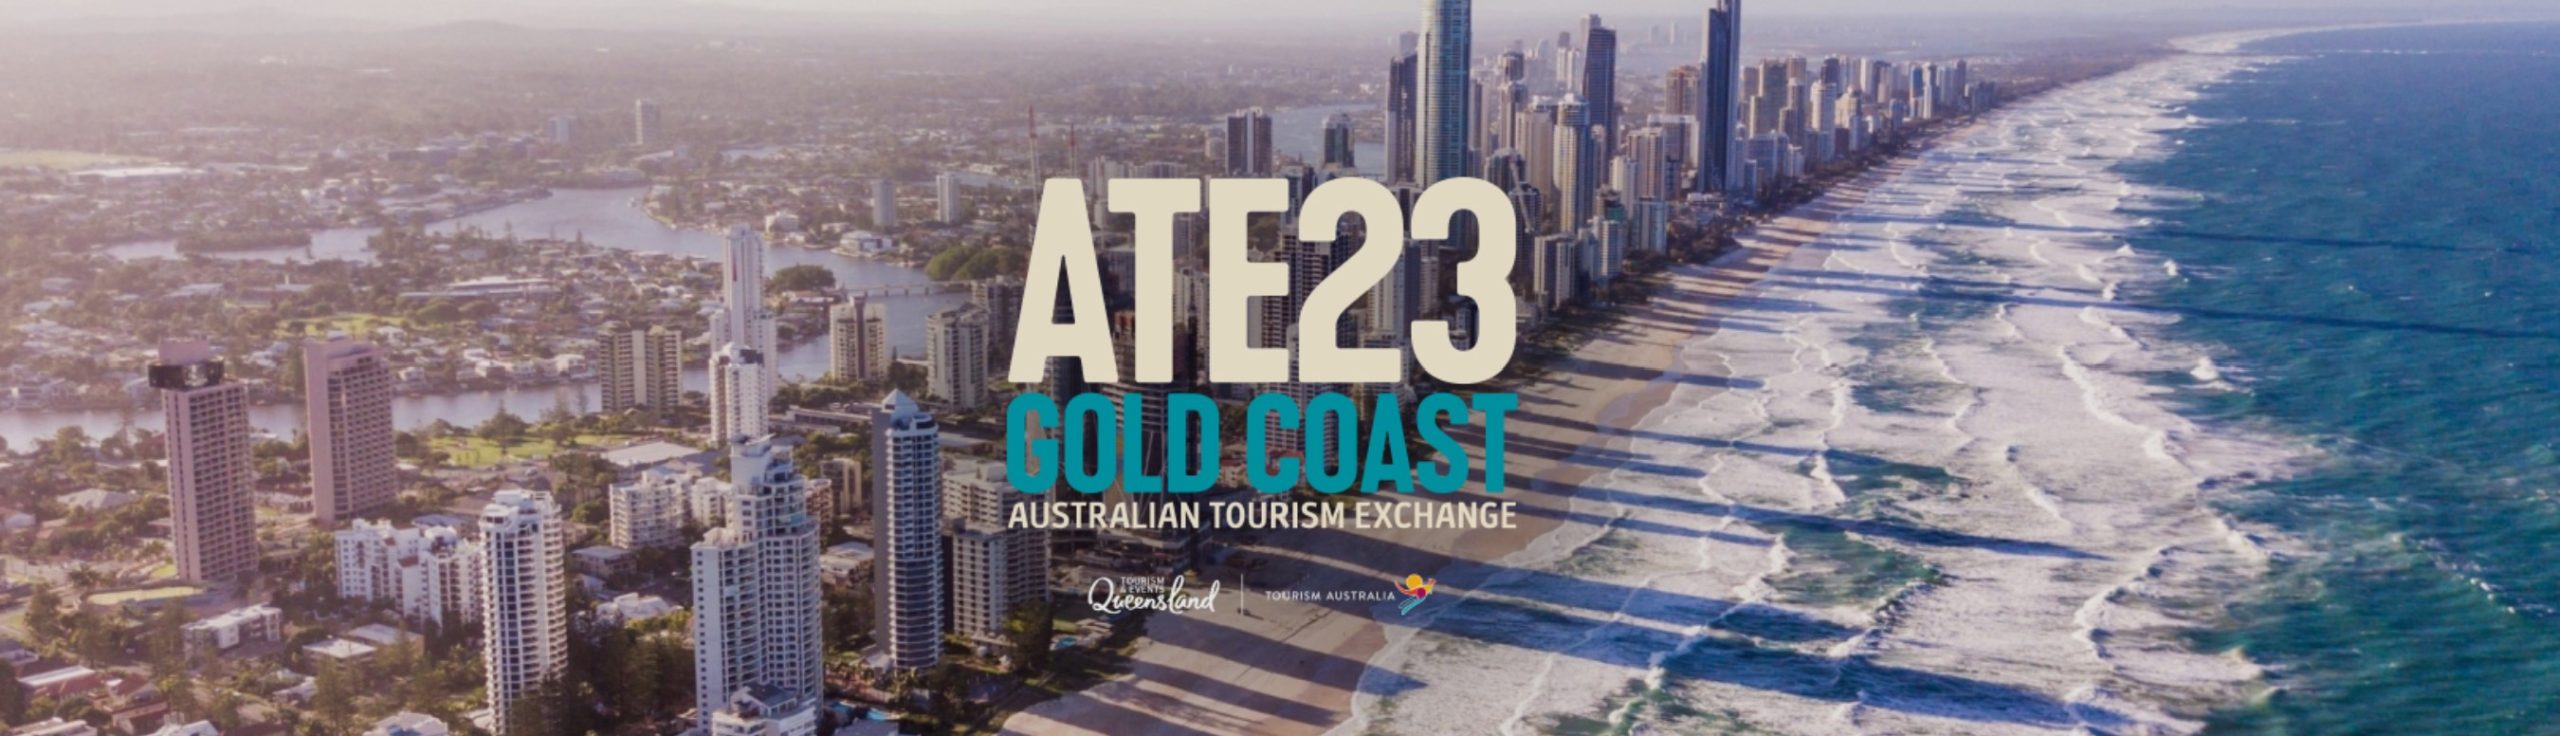 Gold Coast QLD image from the Sky with the ATE logo